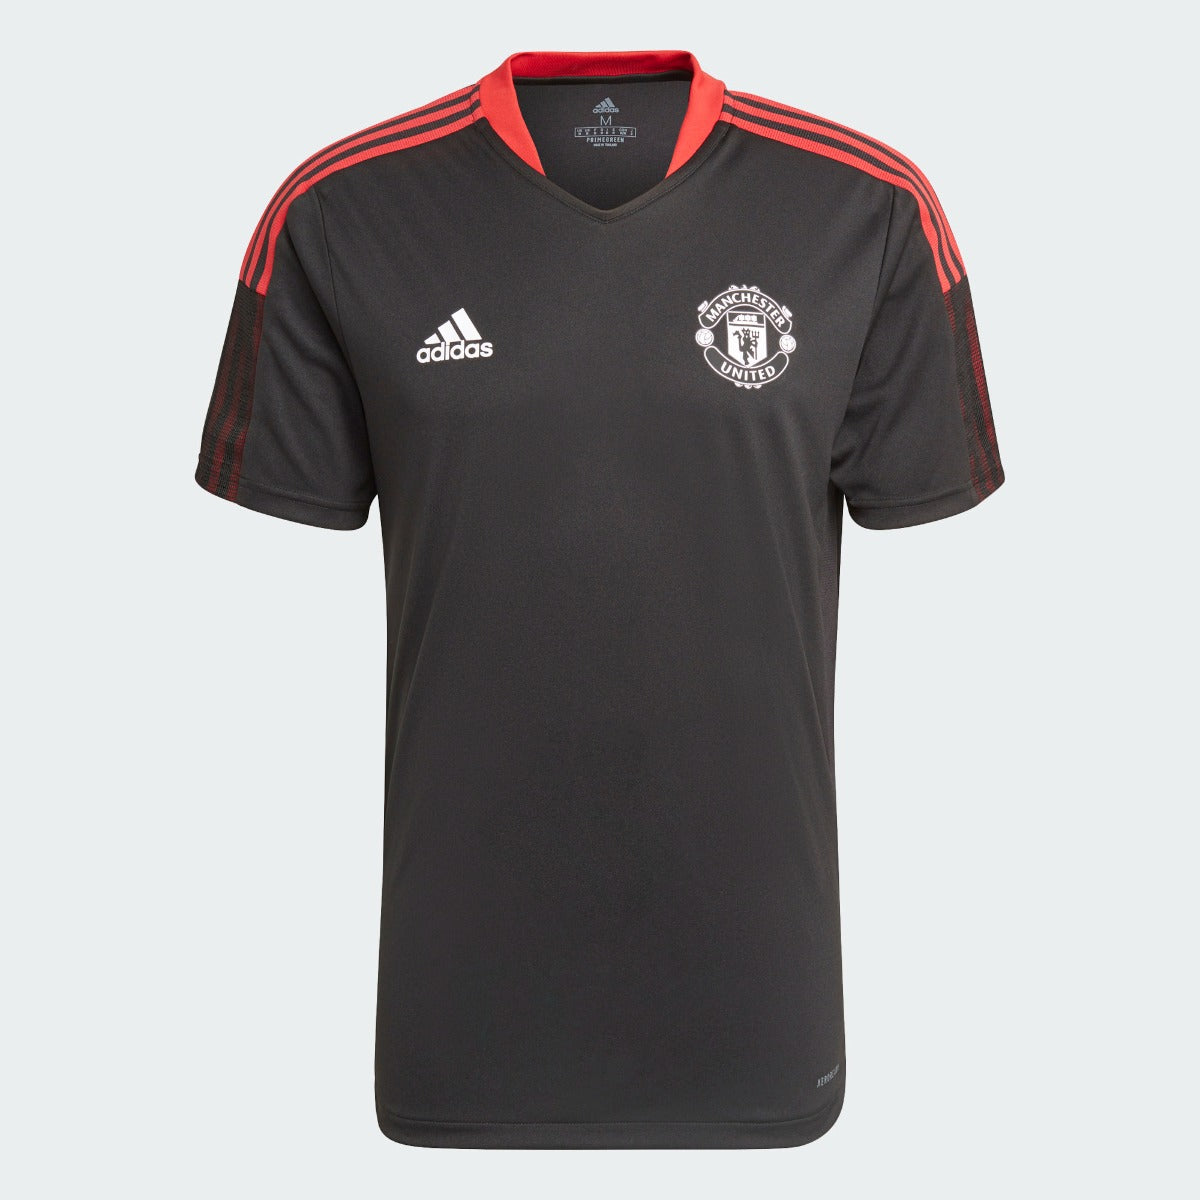 Adidas 2021-22 Manchester United Training Jersey - Black-Red (Front)